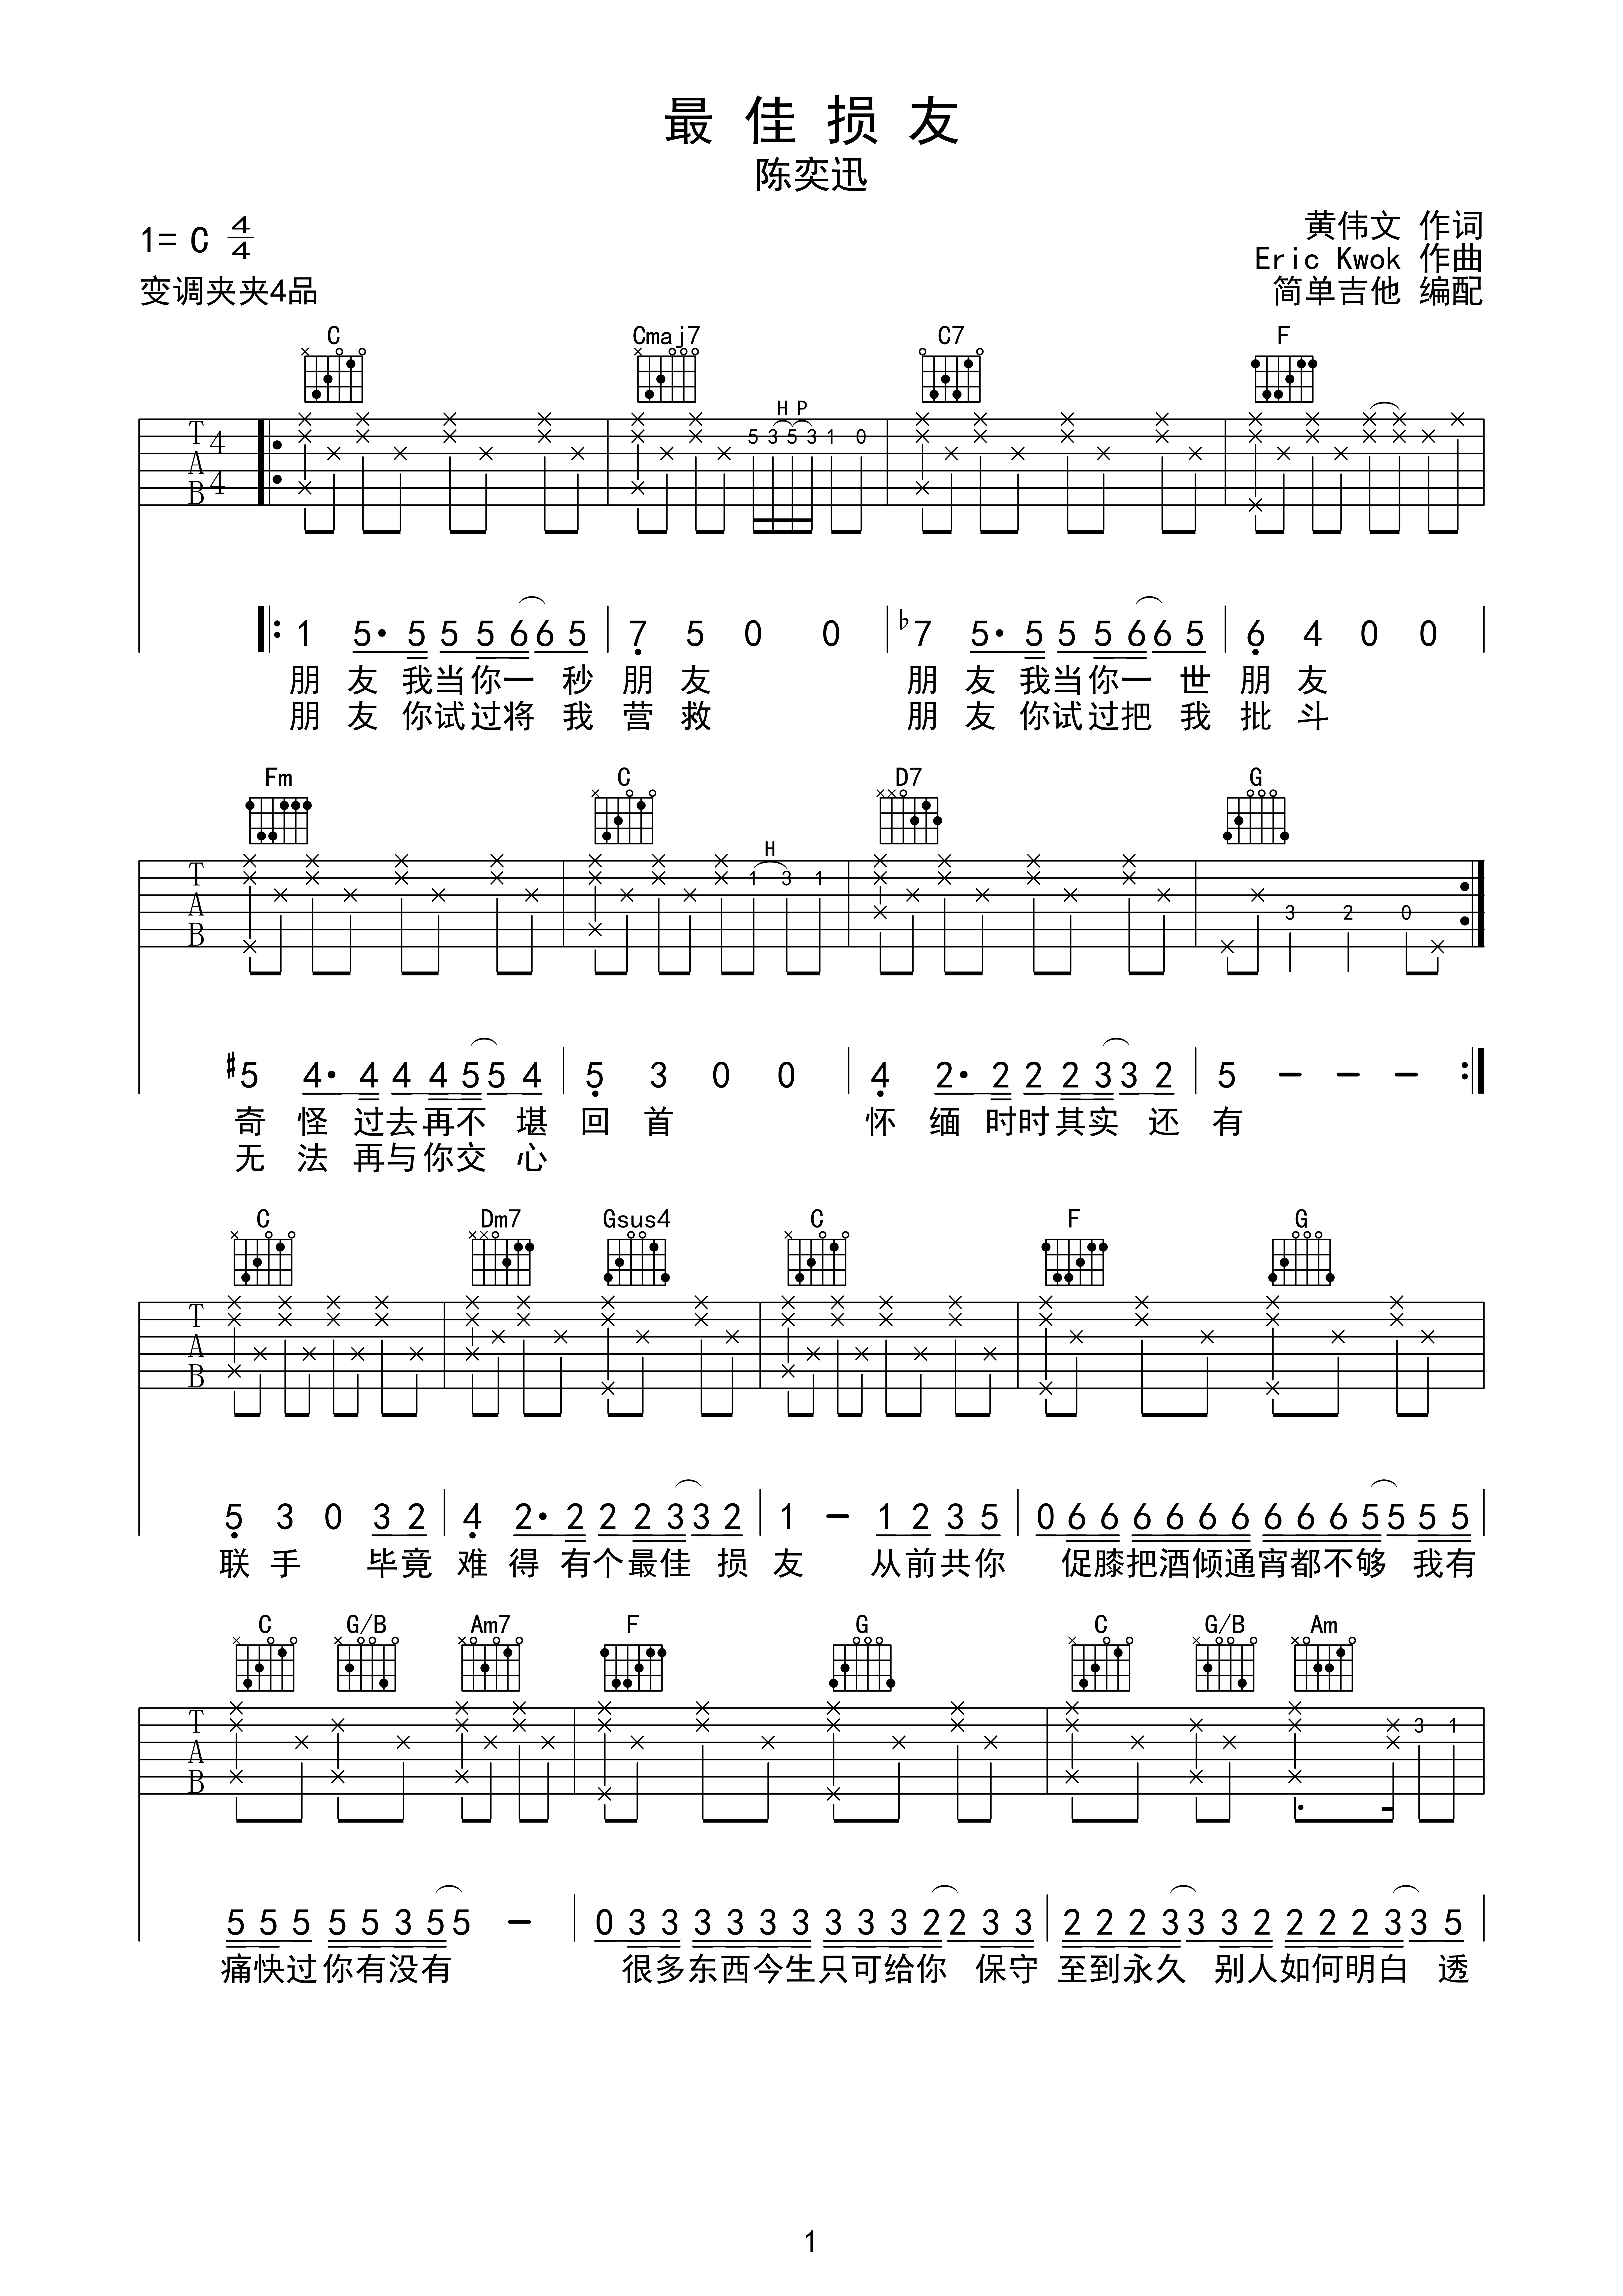 Coldplay "Kaleidoscope" Sheet Music & Chords | Download 2-Page ...